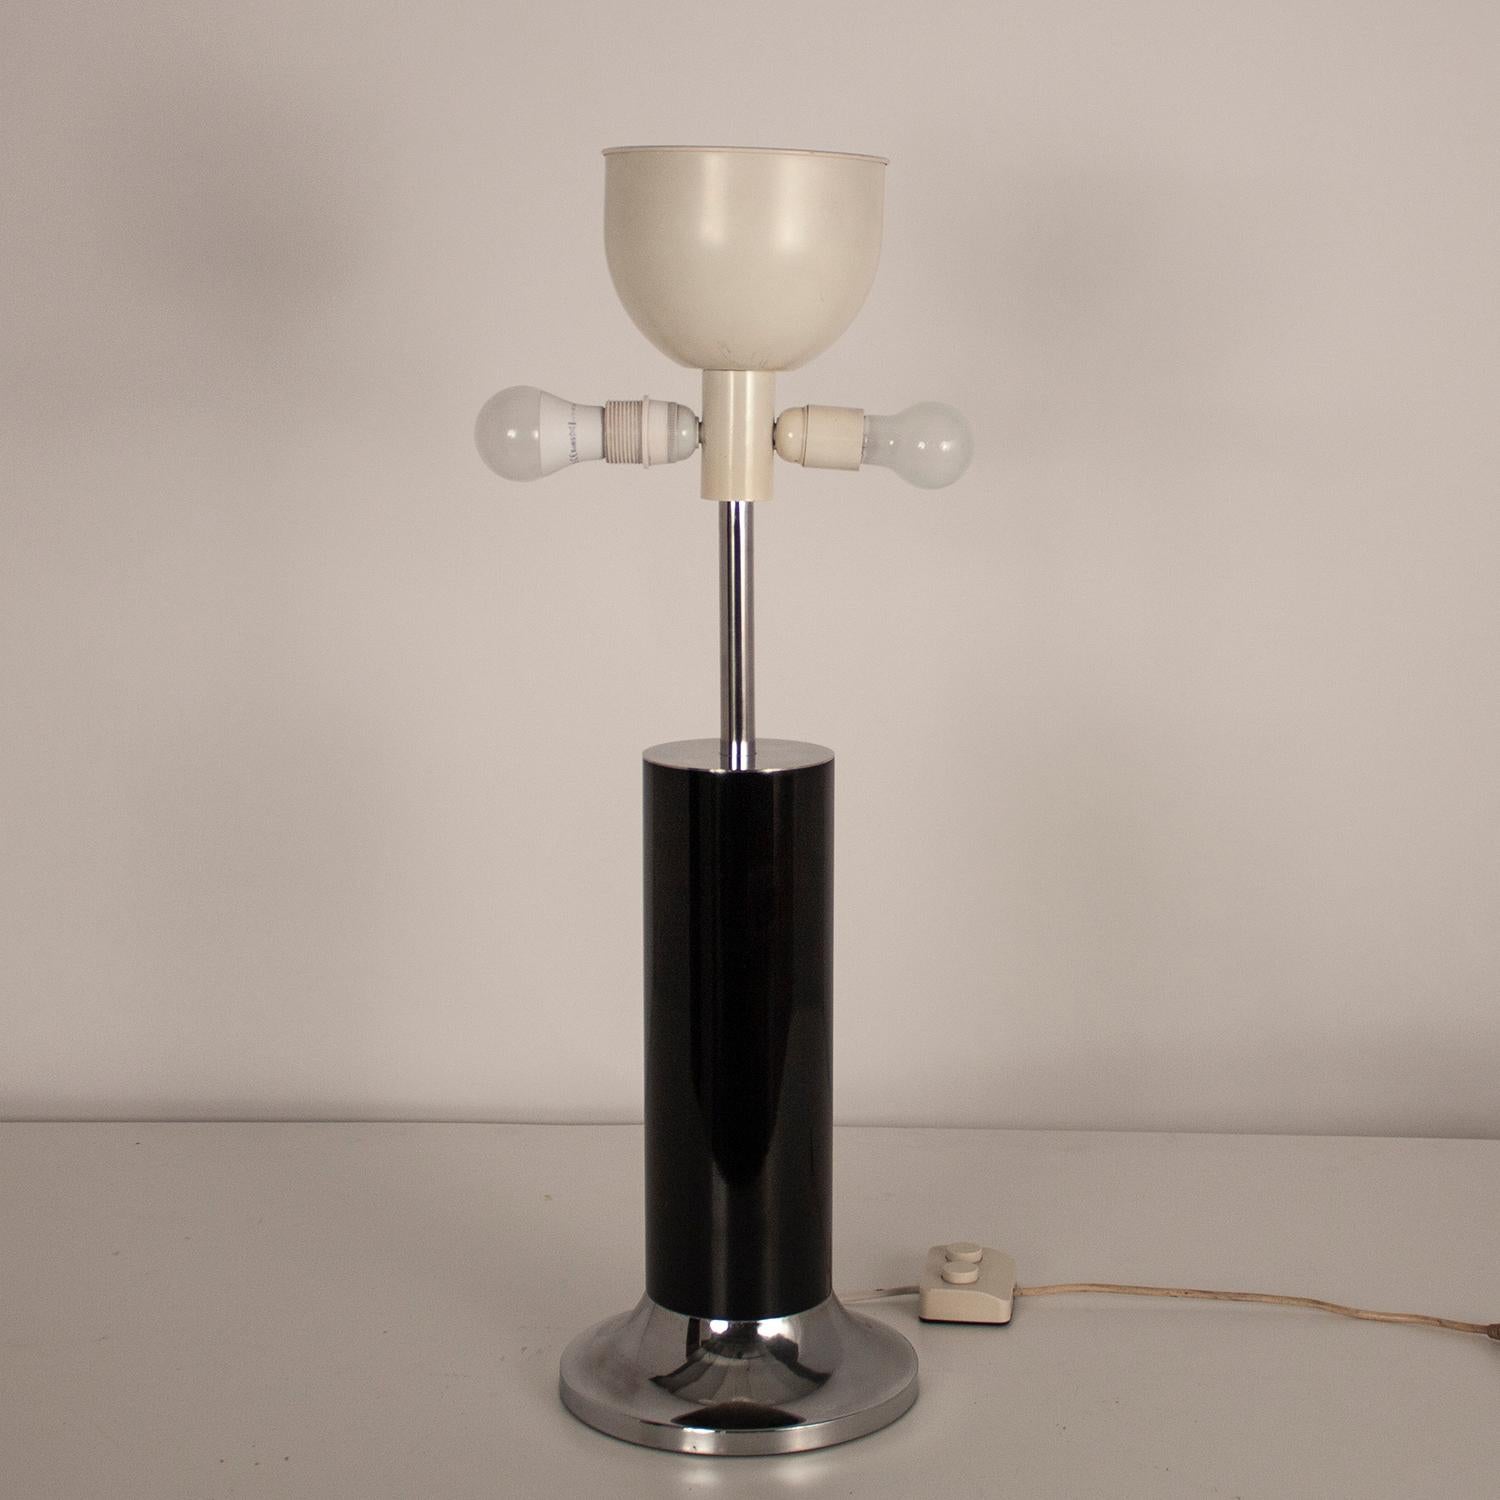 Fabric Large Reggiani Table Lamp Chrome and Black Enameled Metal, 1970s For Sale